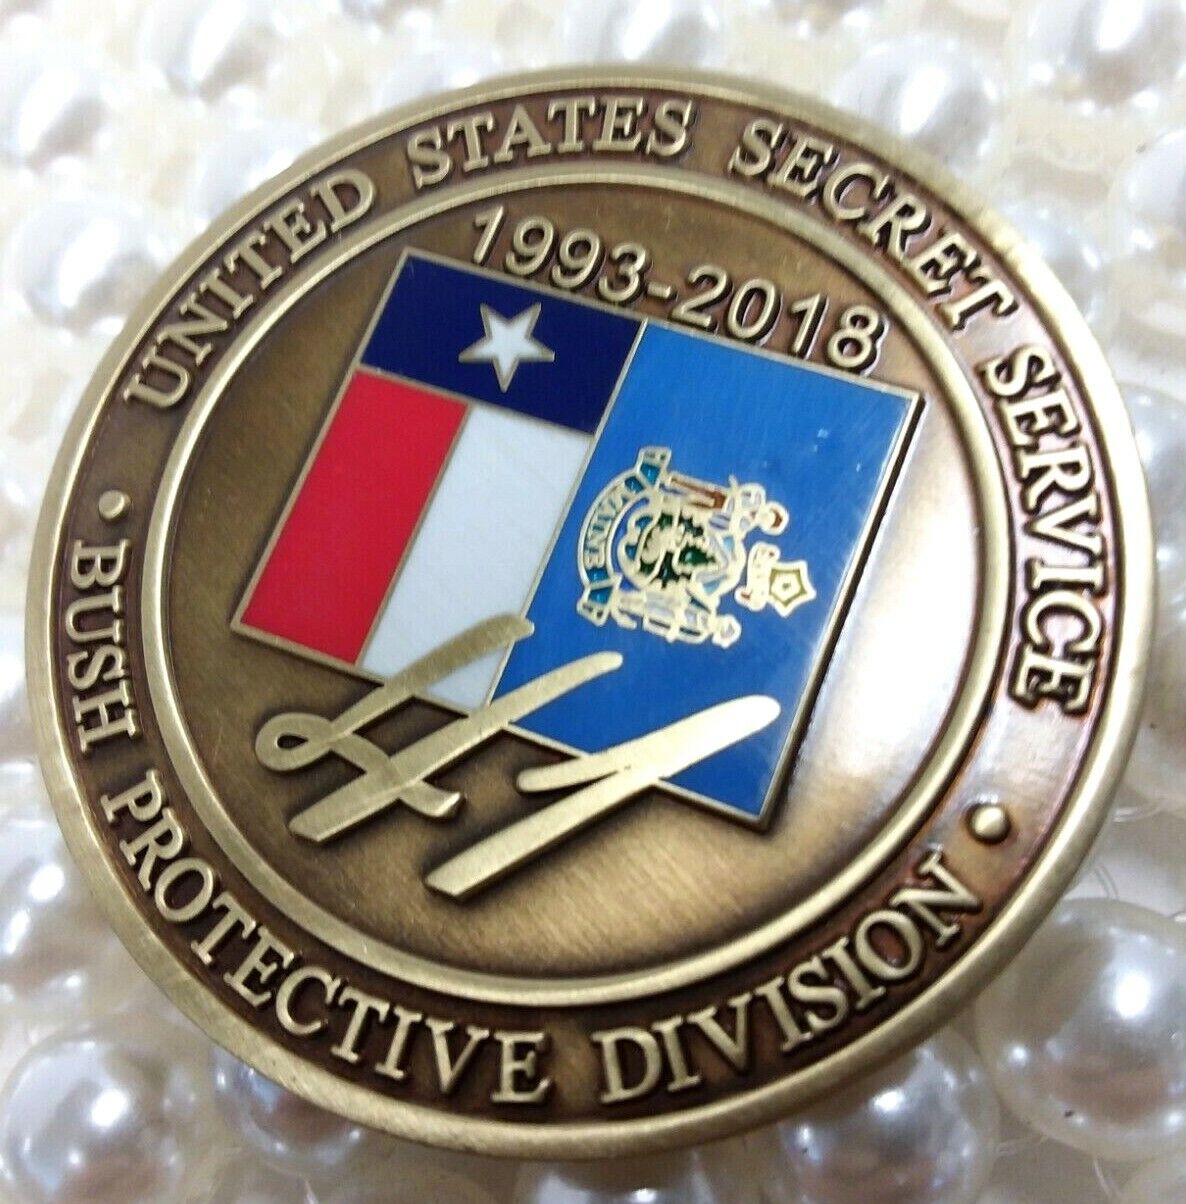 USSS SECRET SERVICE PRESIDENT GEORGE BUSH 41 PROTECTIVE DIVISION COIN 